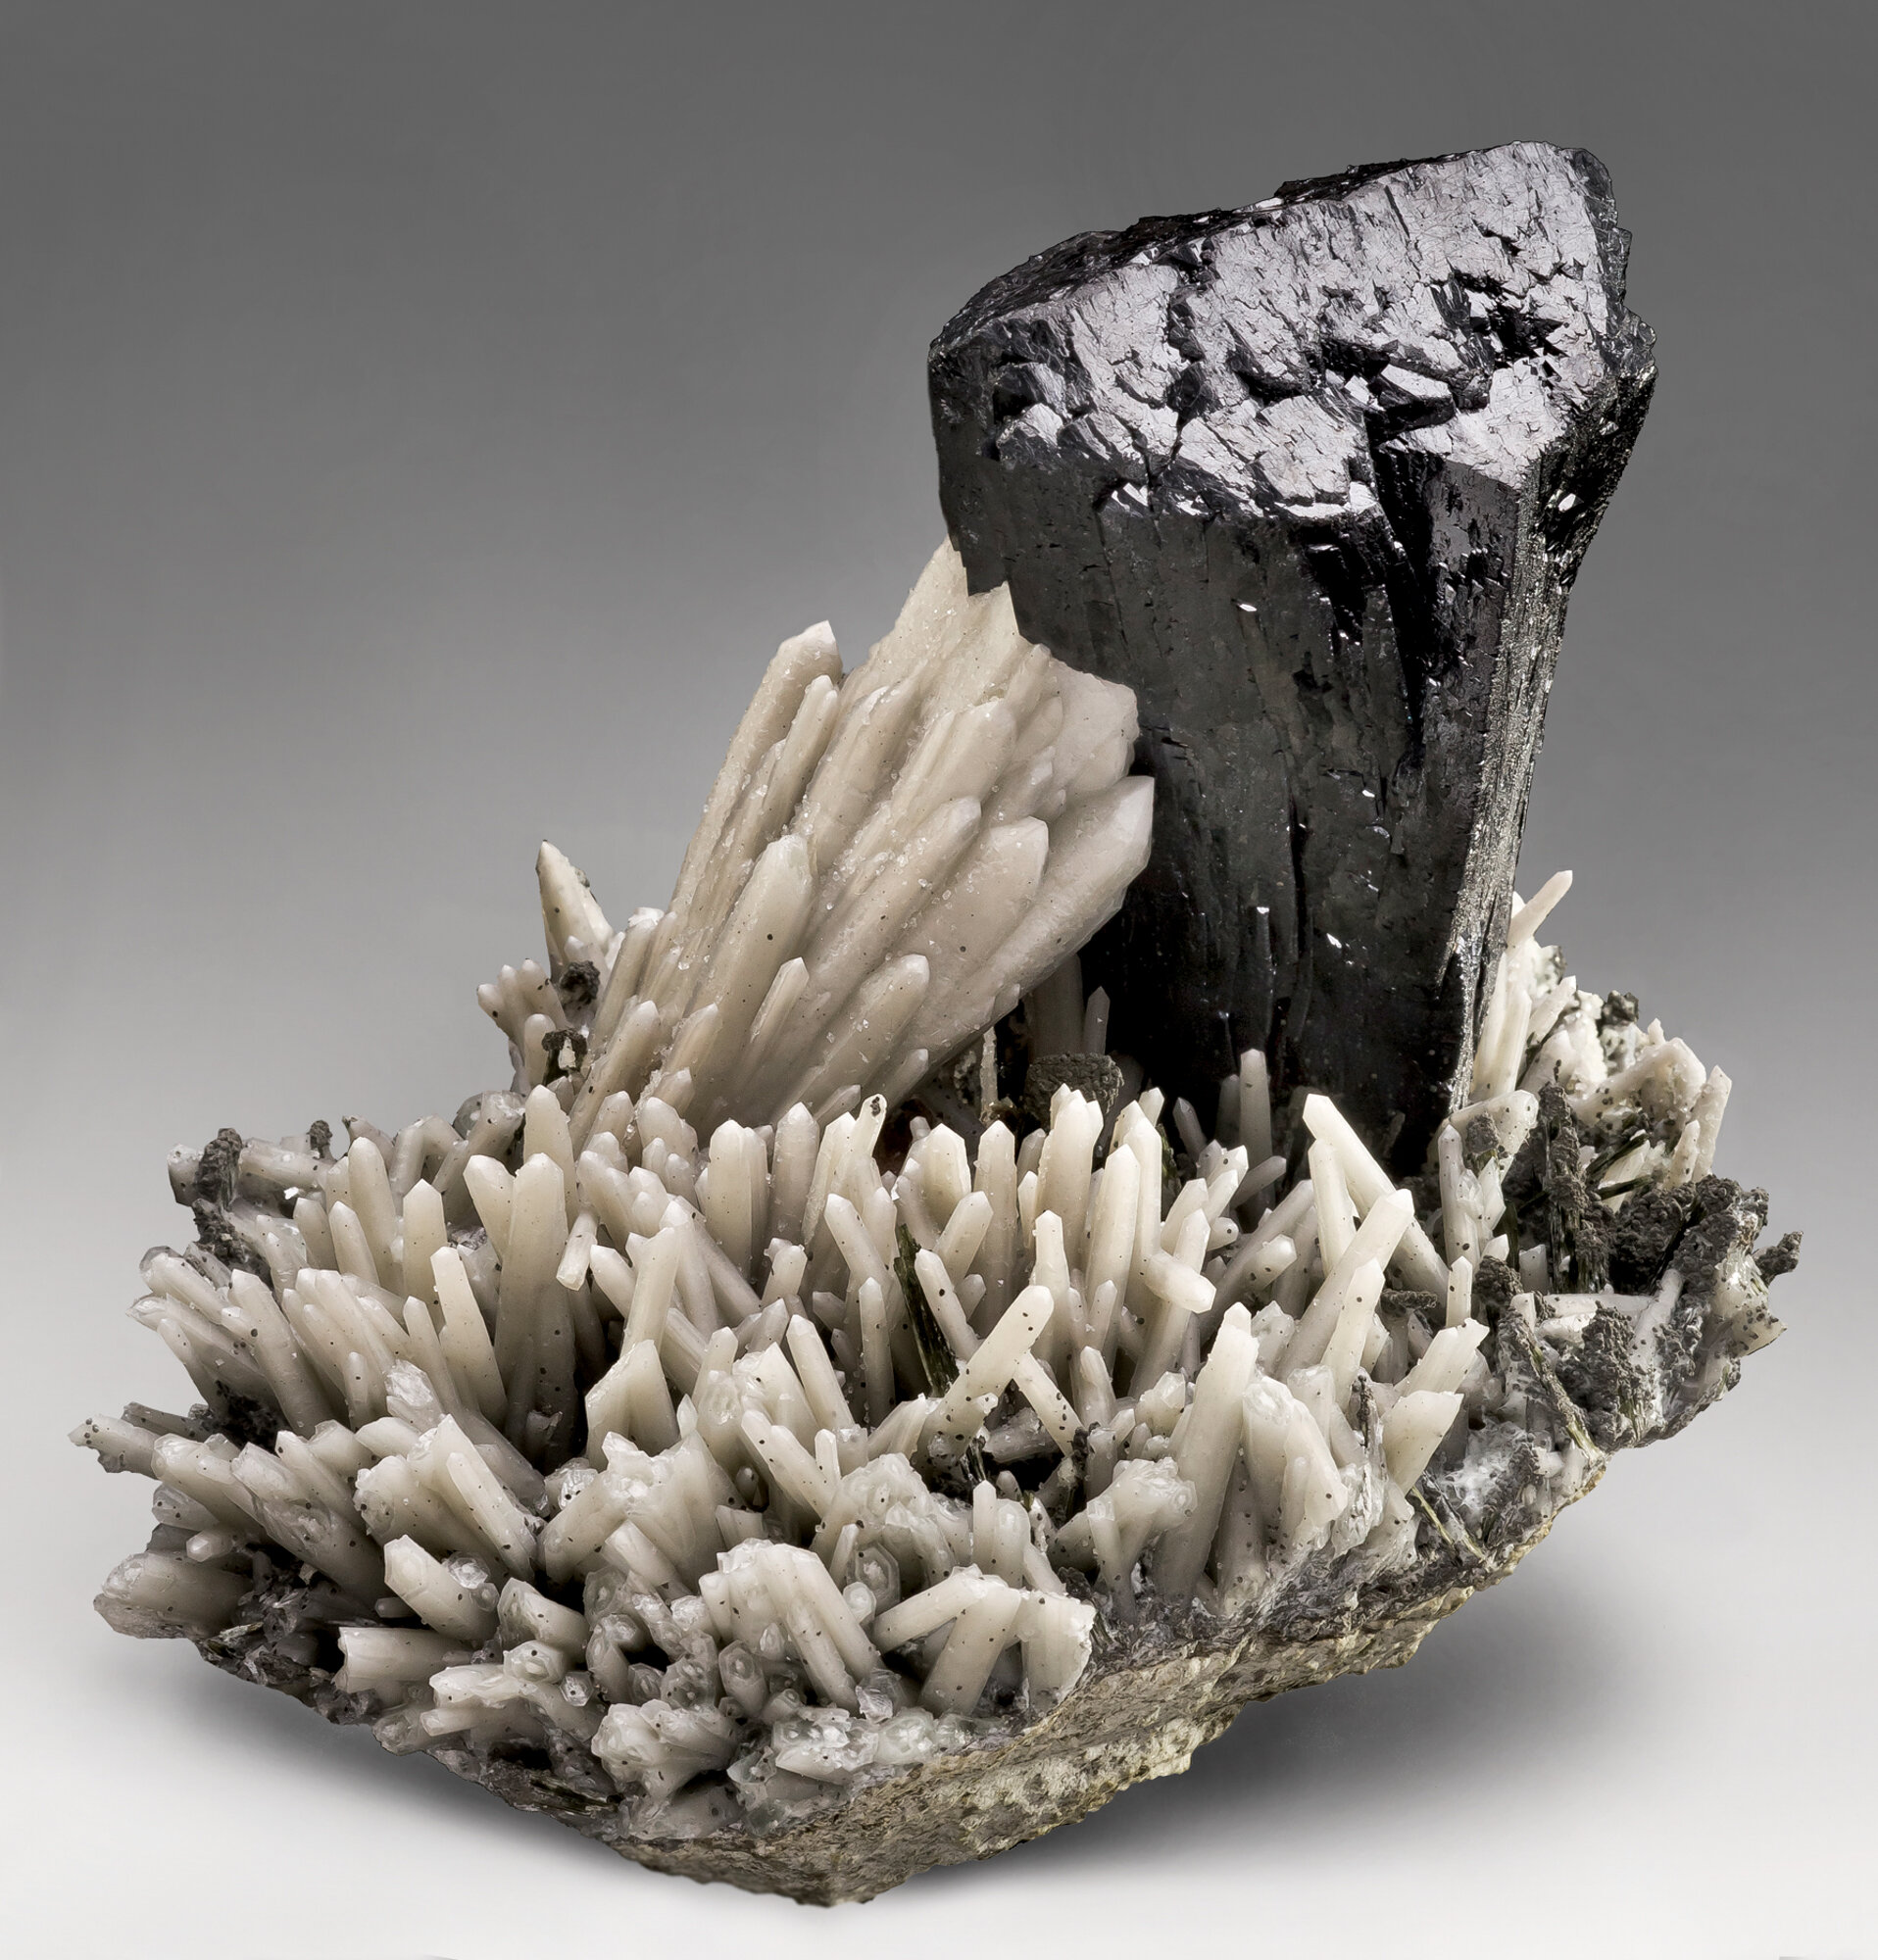  Ilvaite with quartz, 12.5 cm, from Huanggang mine No. 1, Keshiketeng County, Chifeng Prefecture, Inner Mongolia Autonomous Region, China. Found in 2010. 